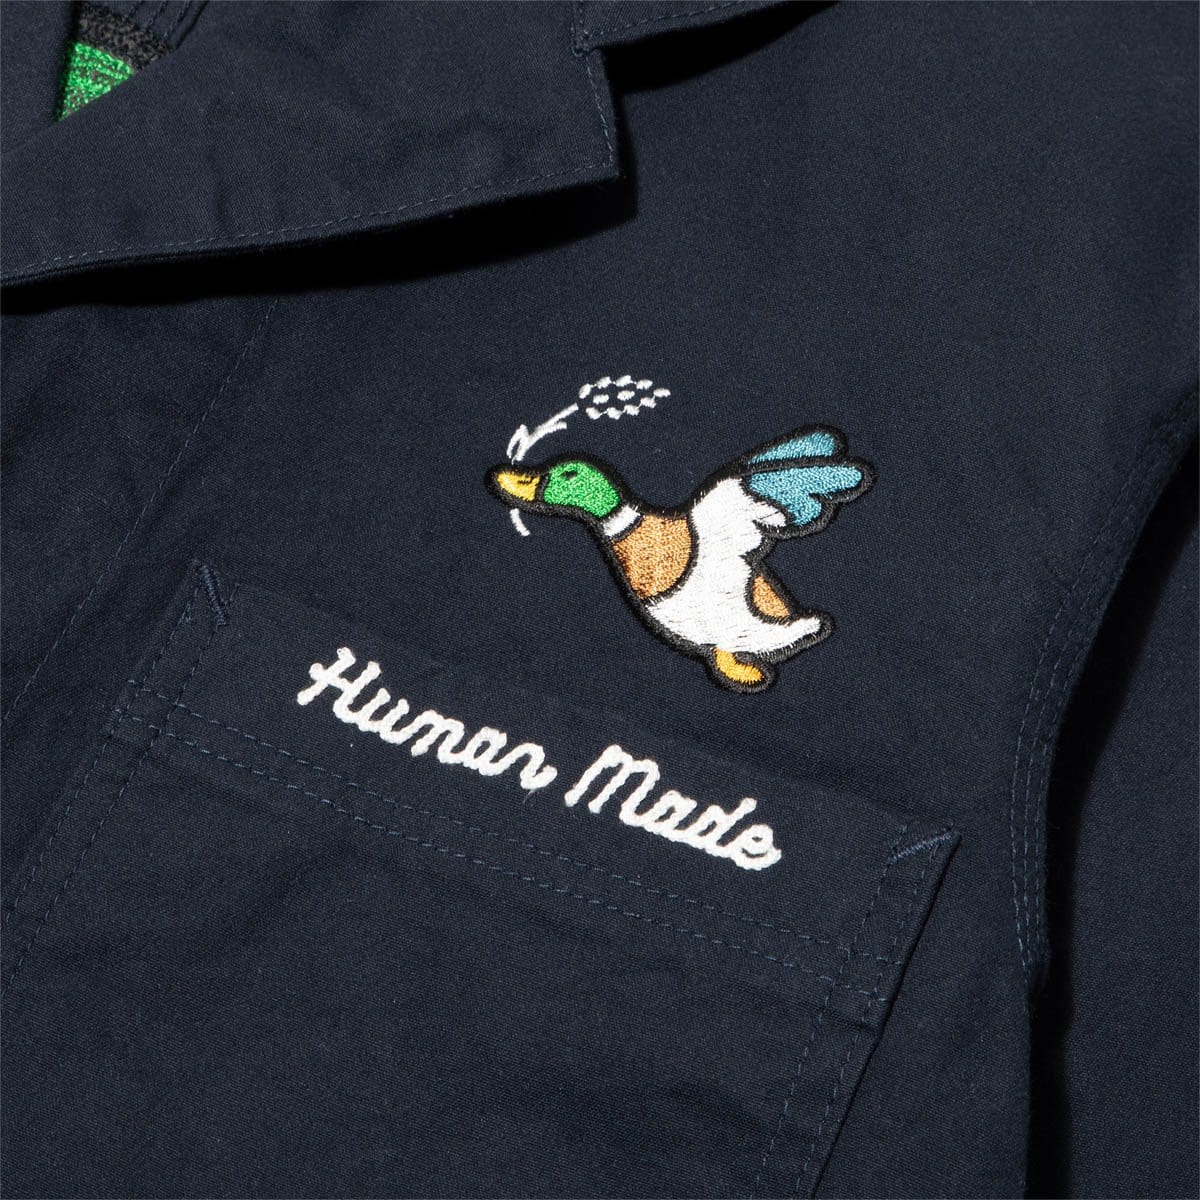 Human Made Outerwear FACTORY JACKET